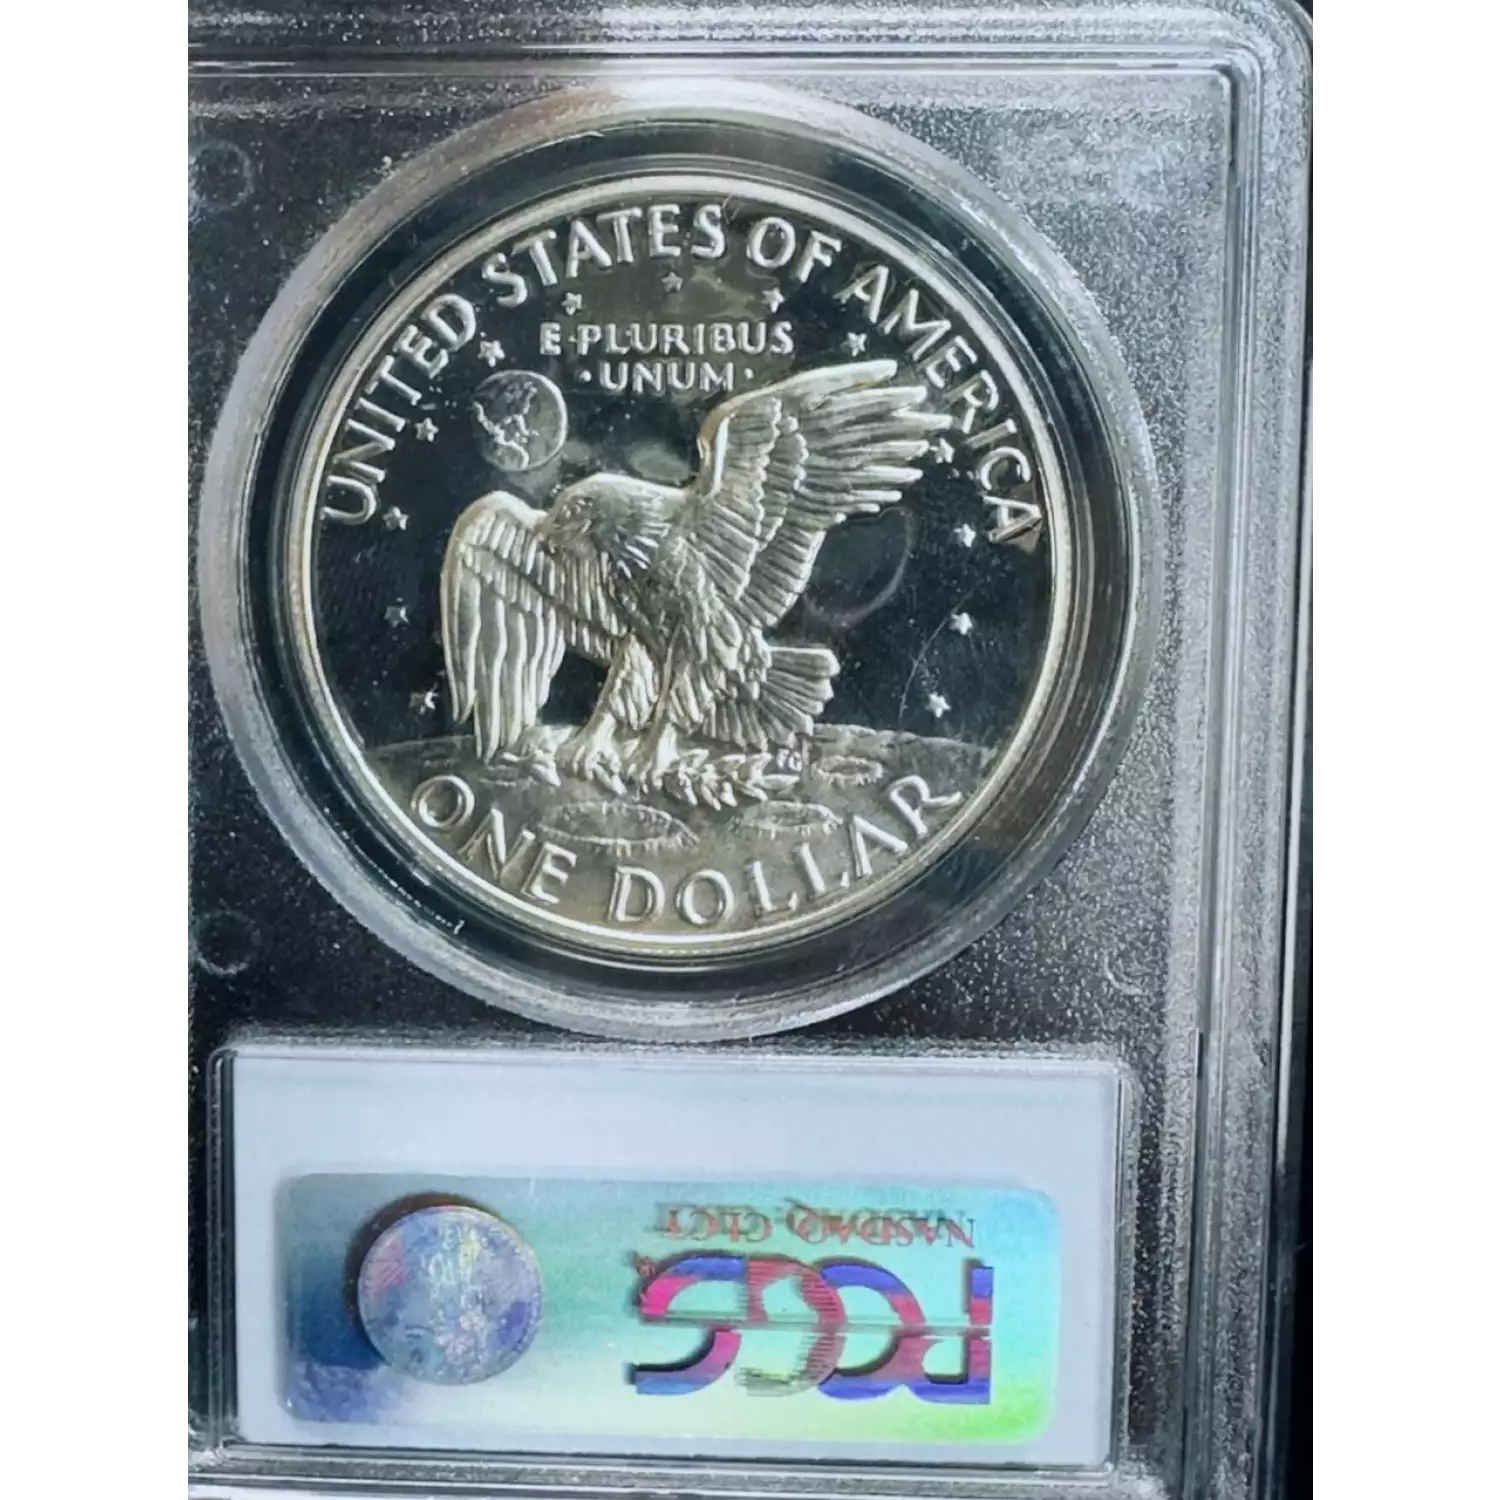 1974-S $1 Silver, DCAM (2)